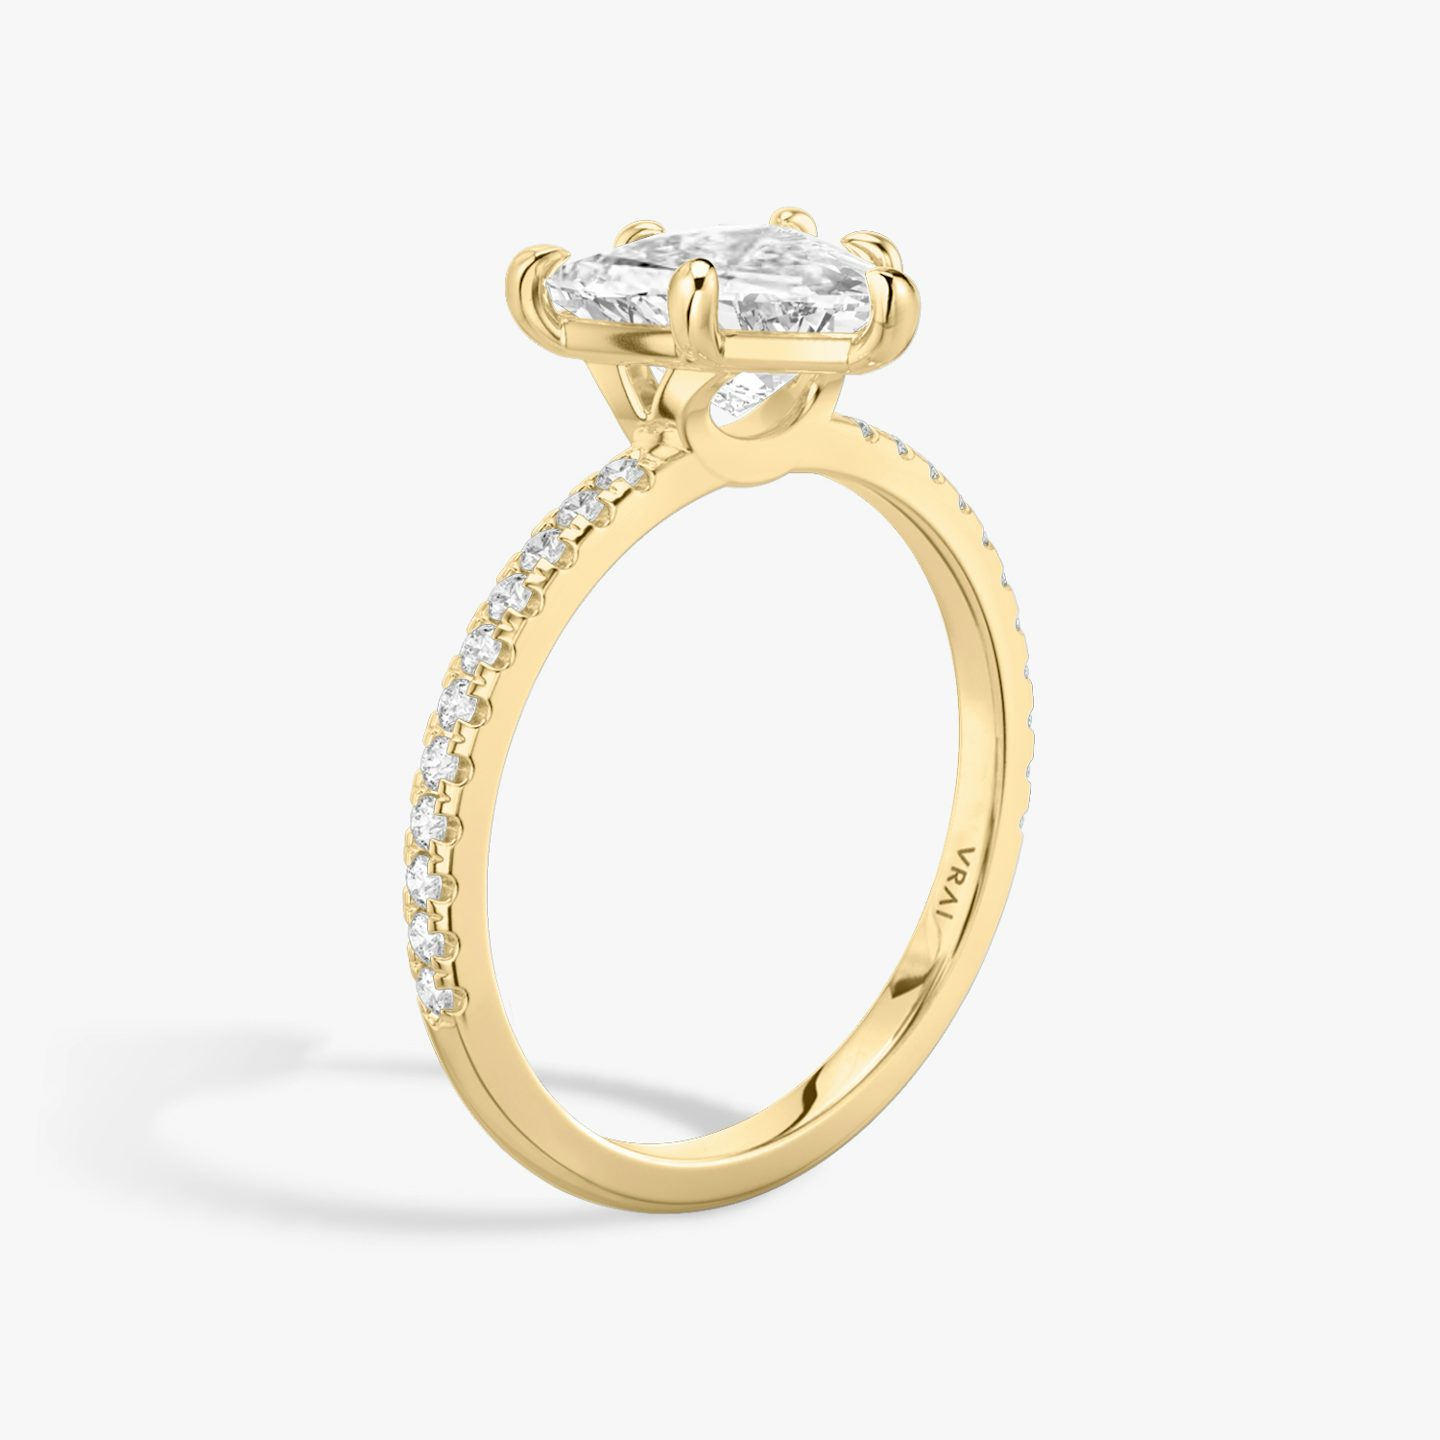 The Signature 6 Prong | Trillion | 18k | 18k Yellow Gold | Band: Pavé | Diamond orientation: vertical | Carat weight: See full inventory